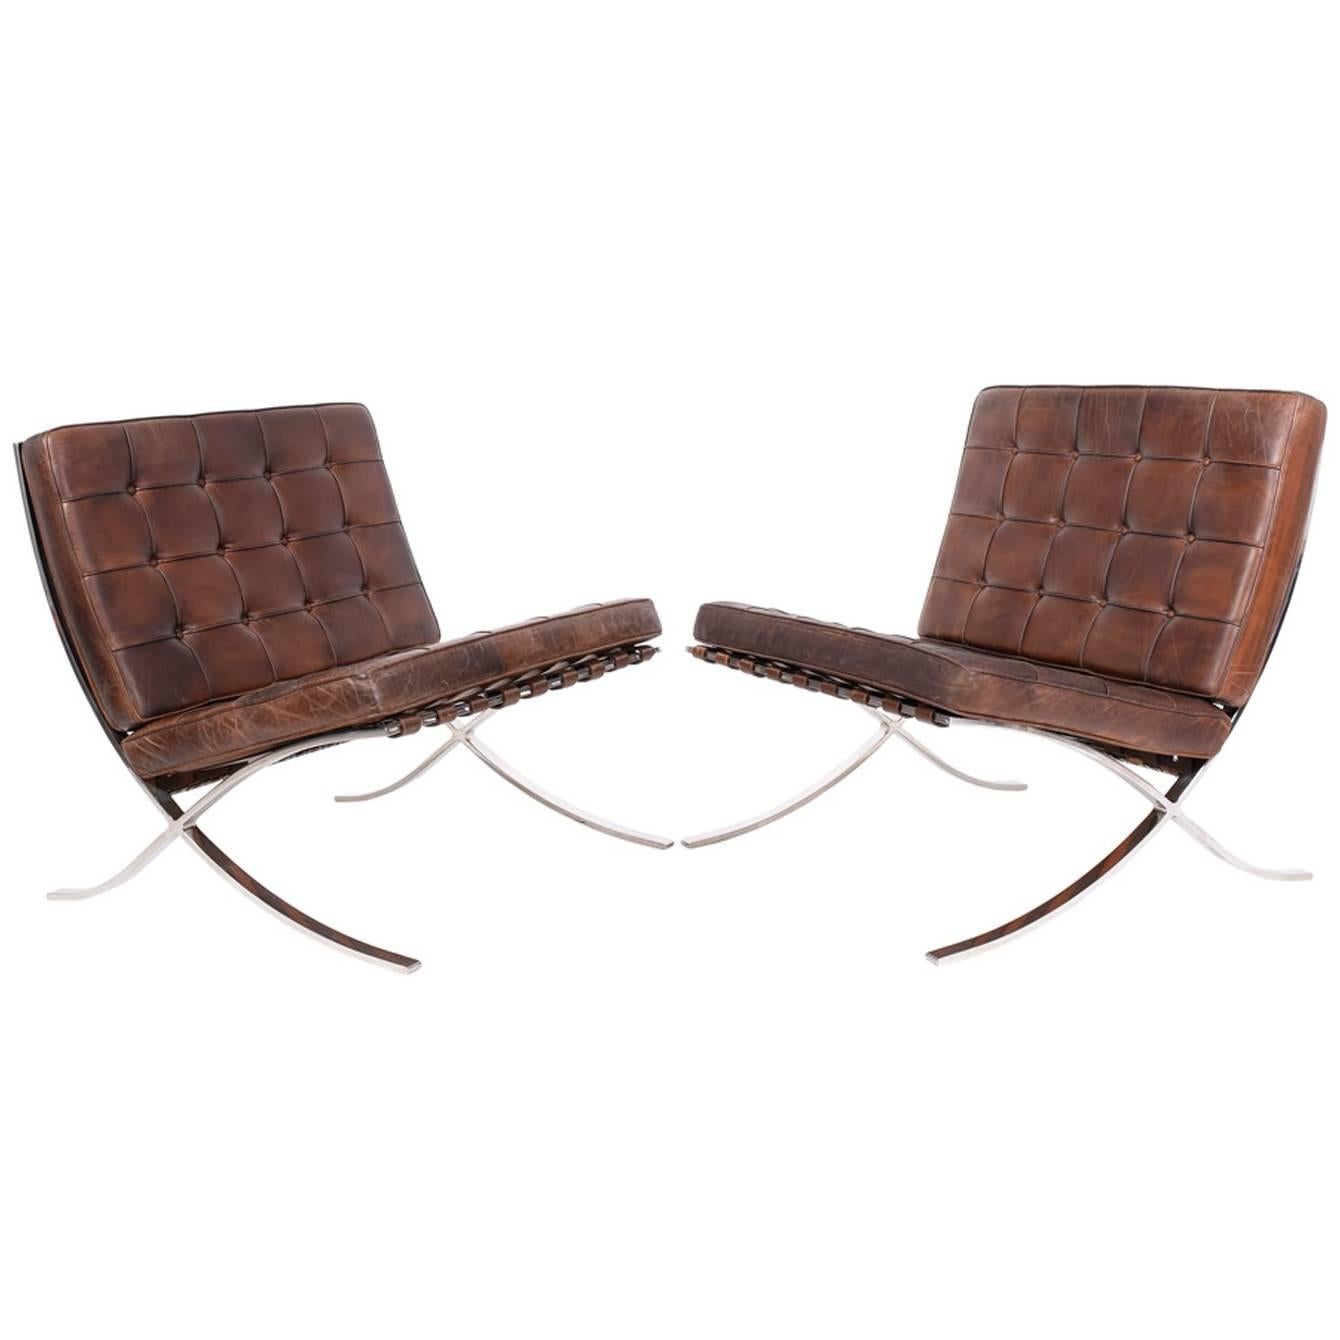 Pair of 1975 Barcelona Chairs by Mies van der Rohde for Knoll